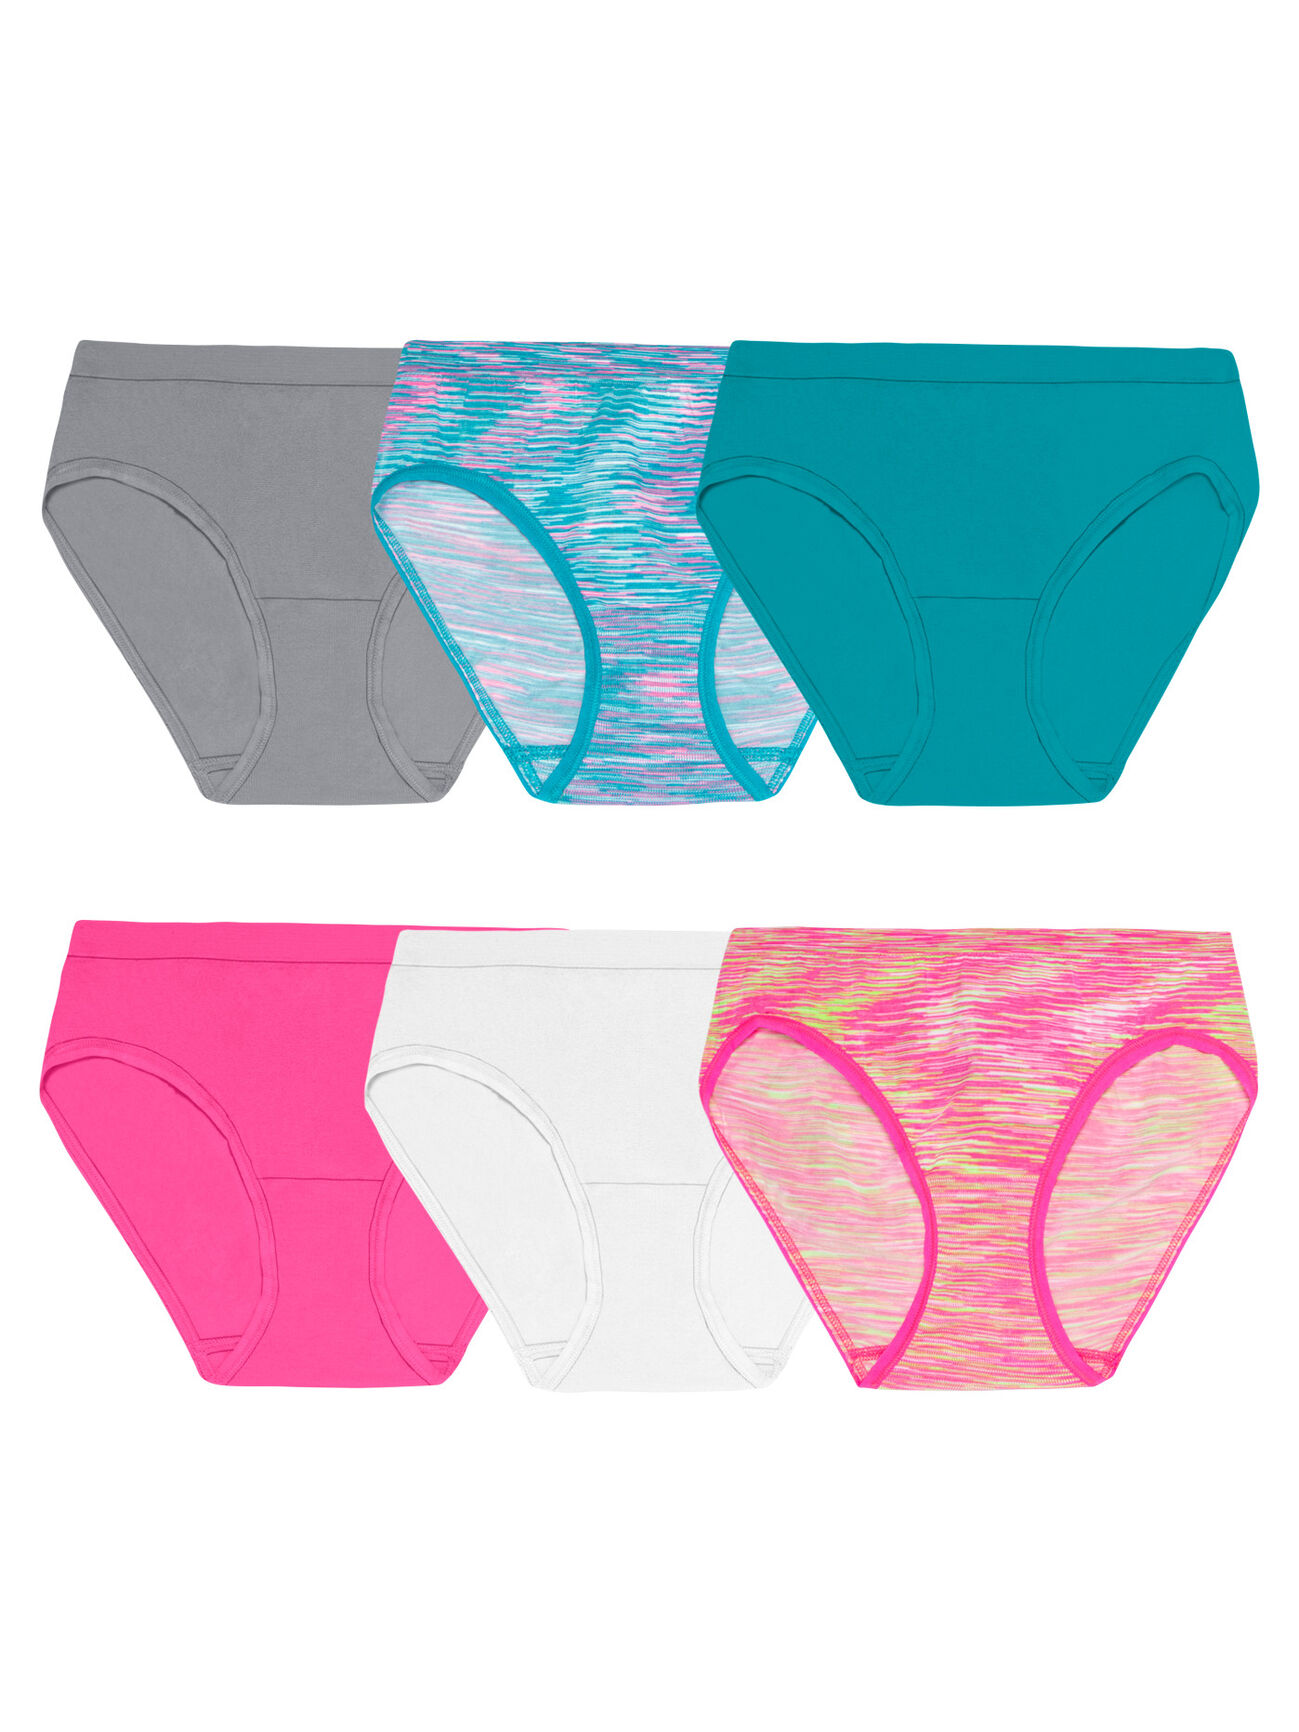 Our Point of View on Fruit of the Loom Girls Underwear From